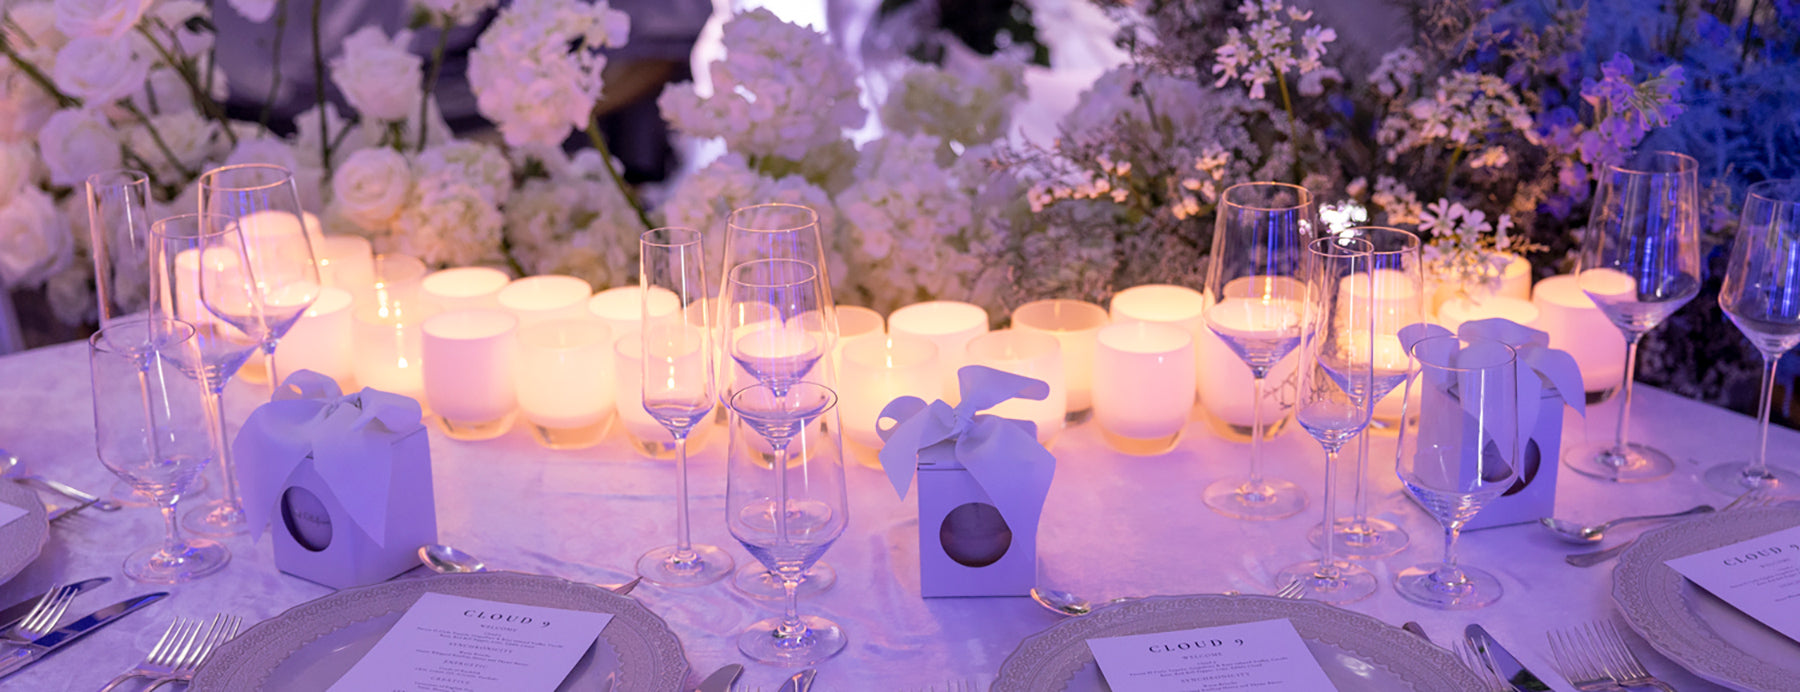 glowing white hand-blown glass candle holders part of a beautiful table scape with flowers, menus and wine glasses.